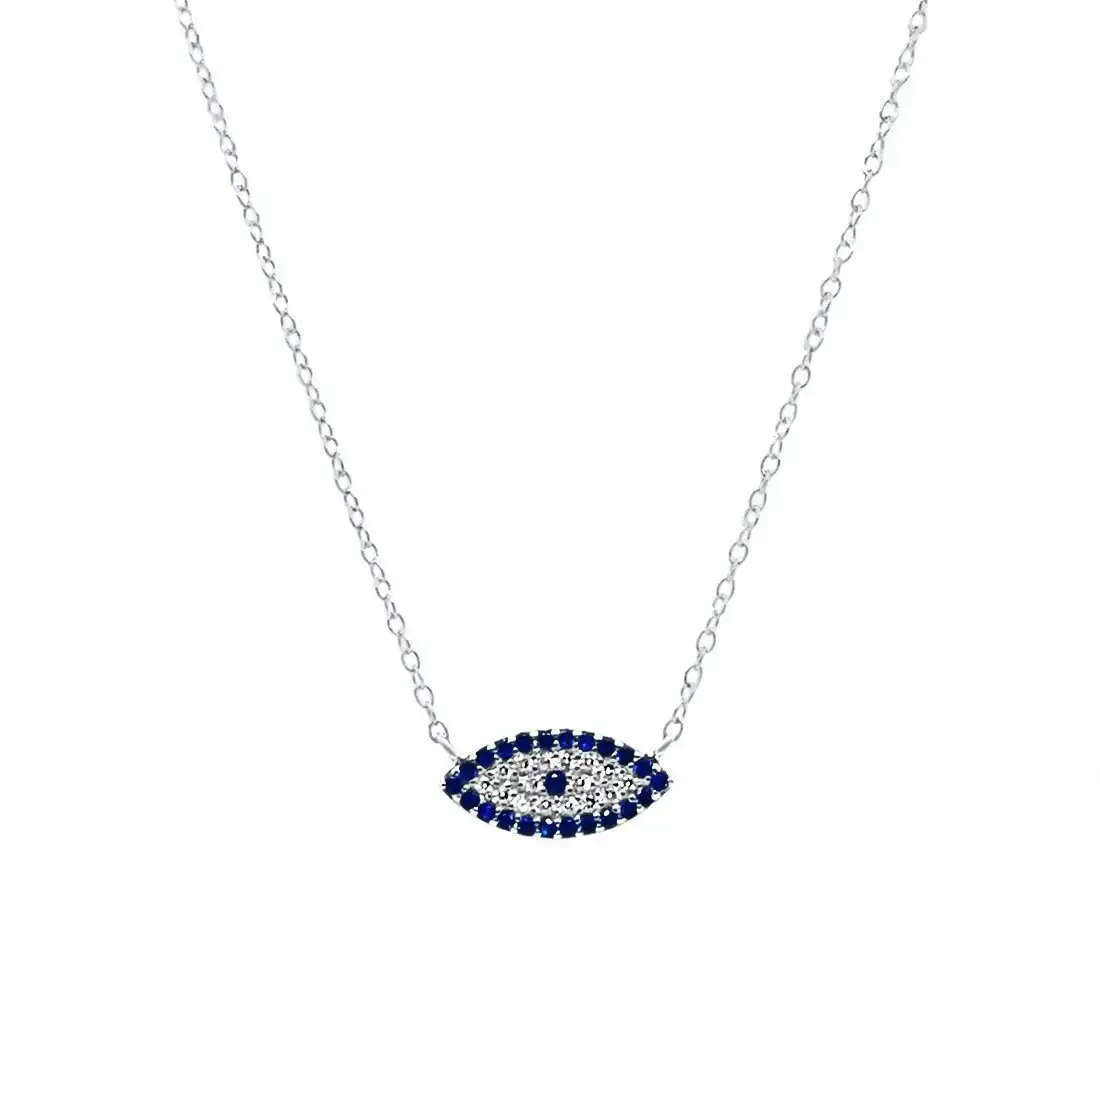 45cm Evil Eye Necklace with Cubic Zirconia in Sterling Silver